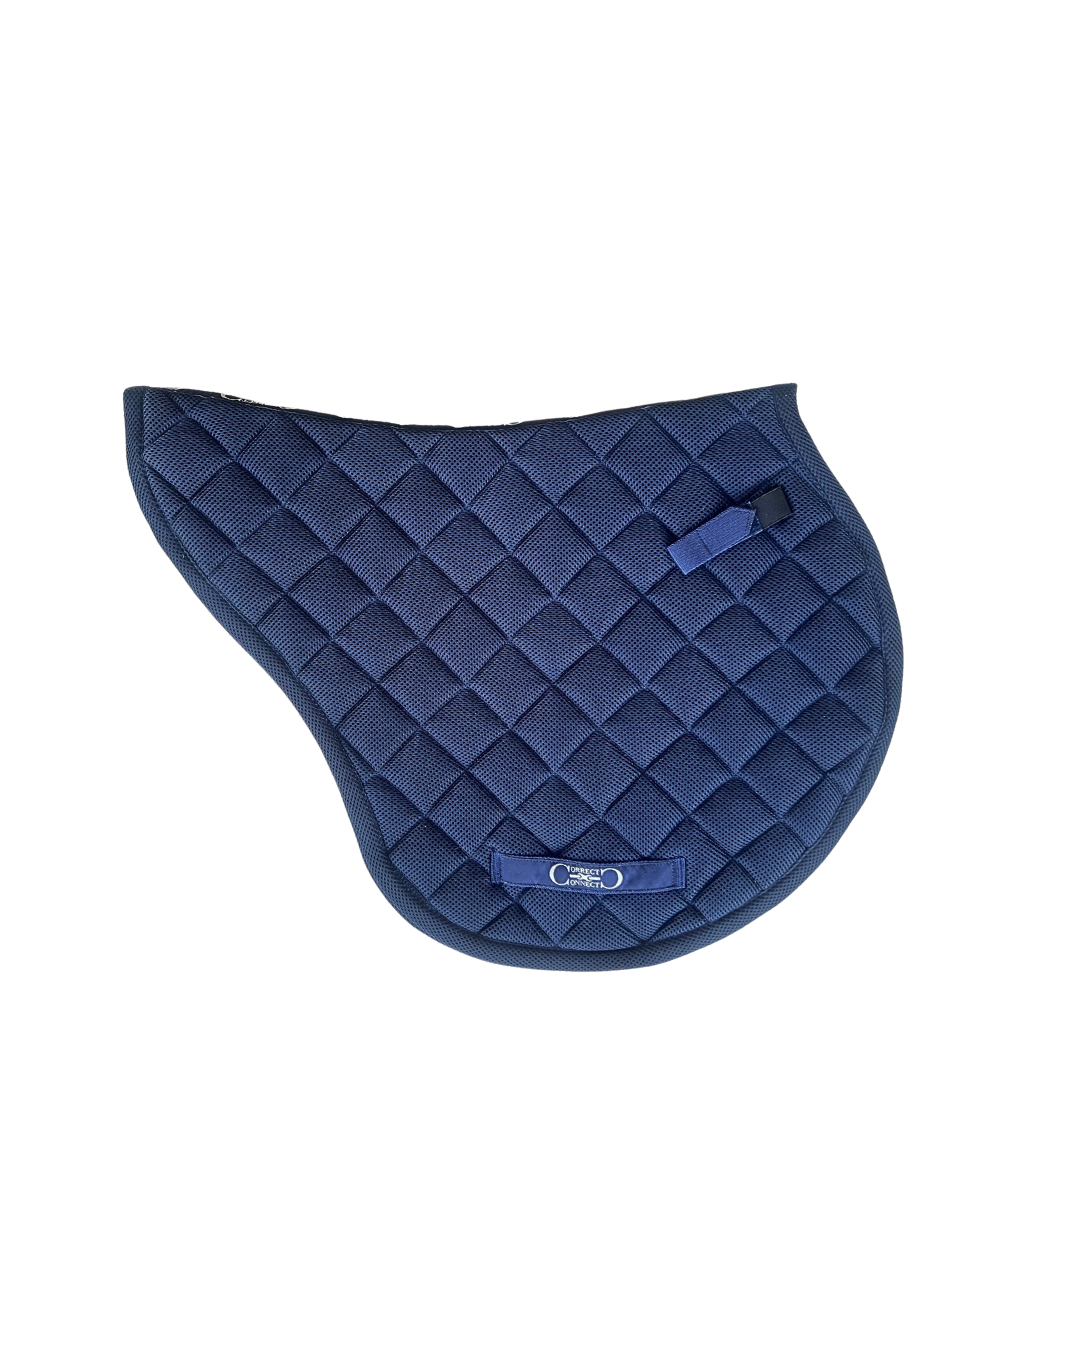 Contour Jump Mesh Saddle Pad with Quick Dry Cotton Lining in Navy, White or Black